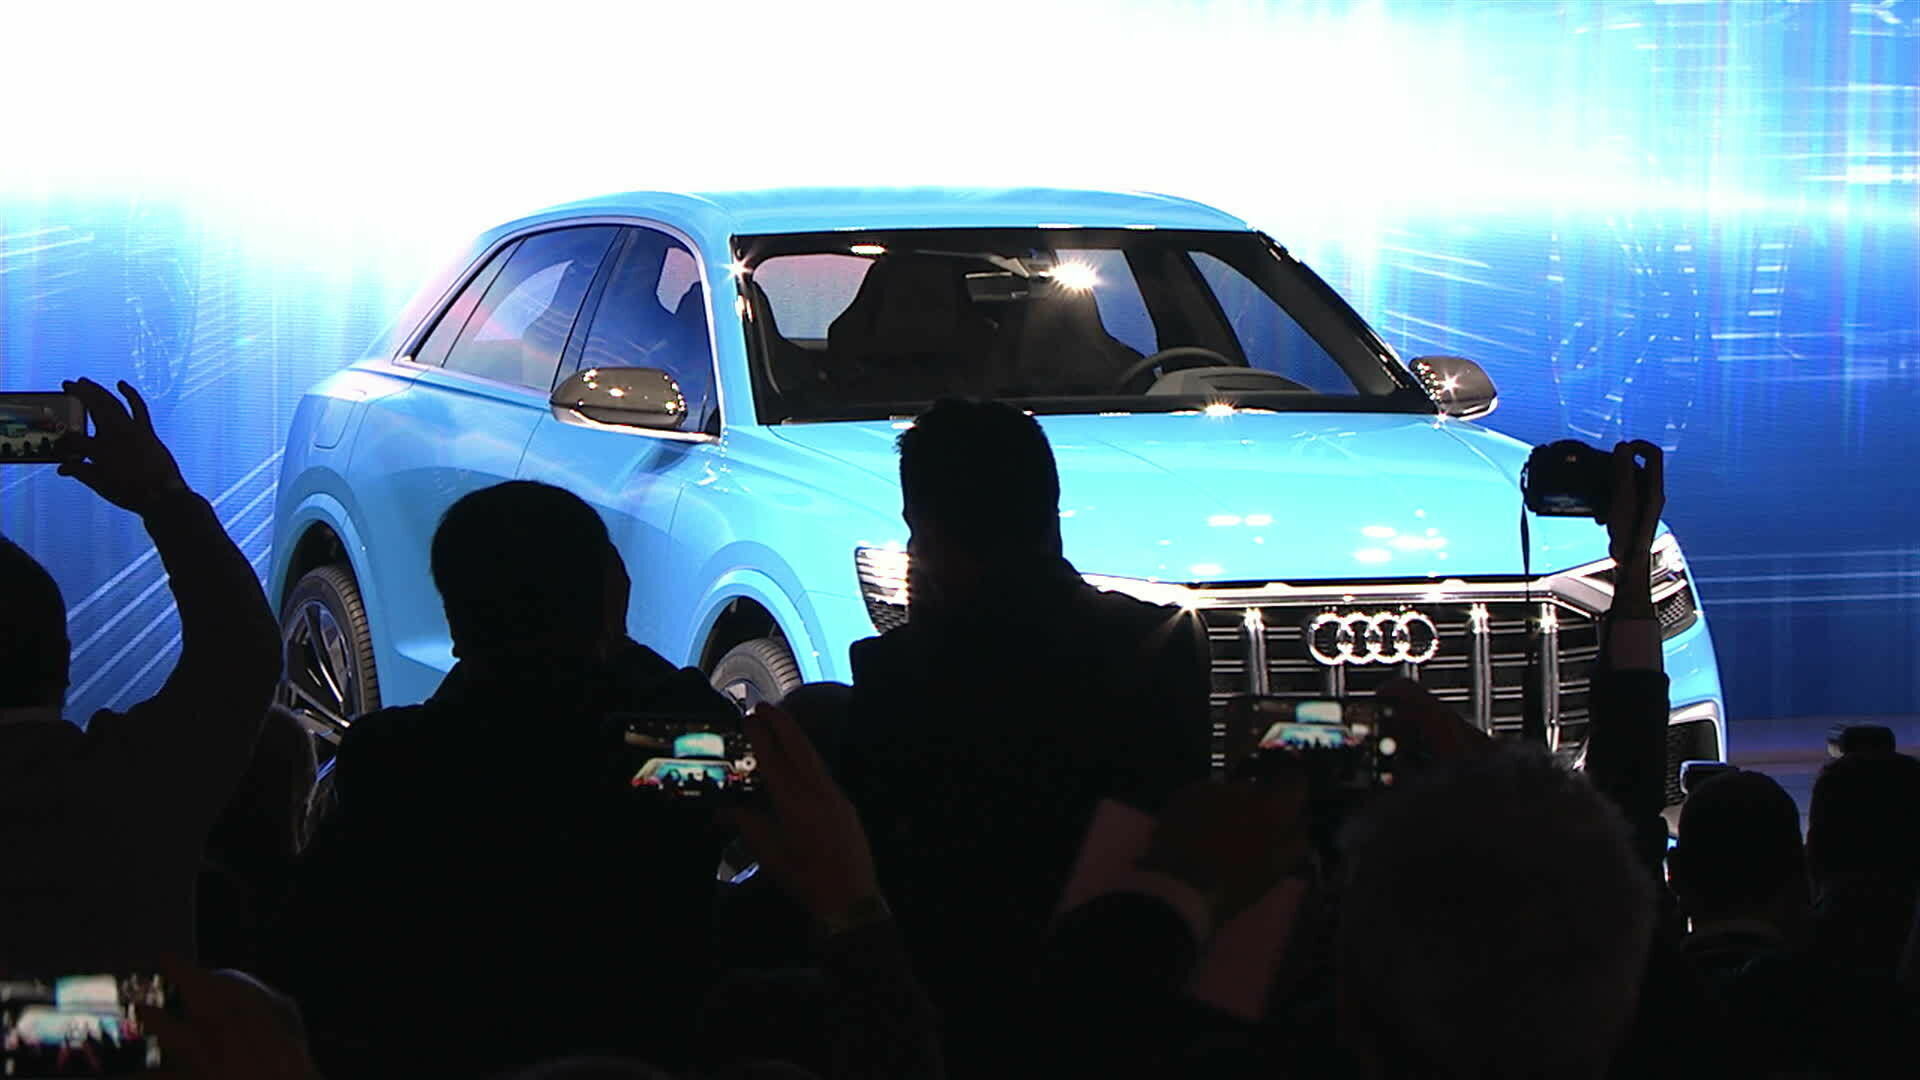 The Audi highlights at the Detroit Motor Show